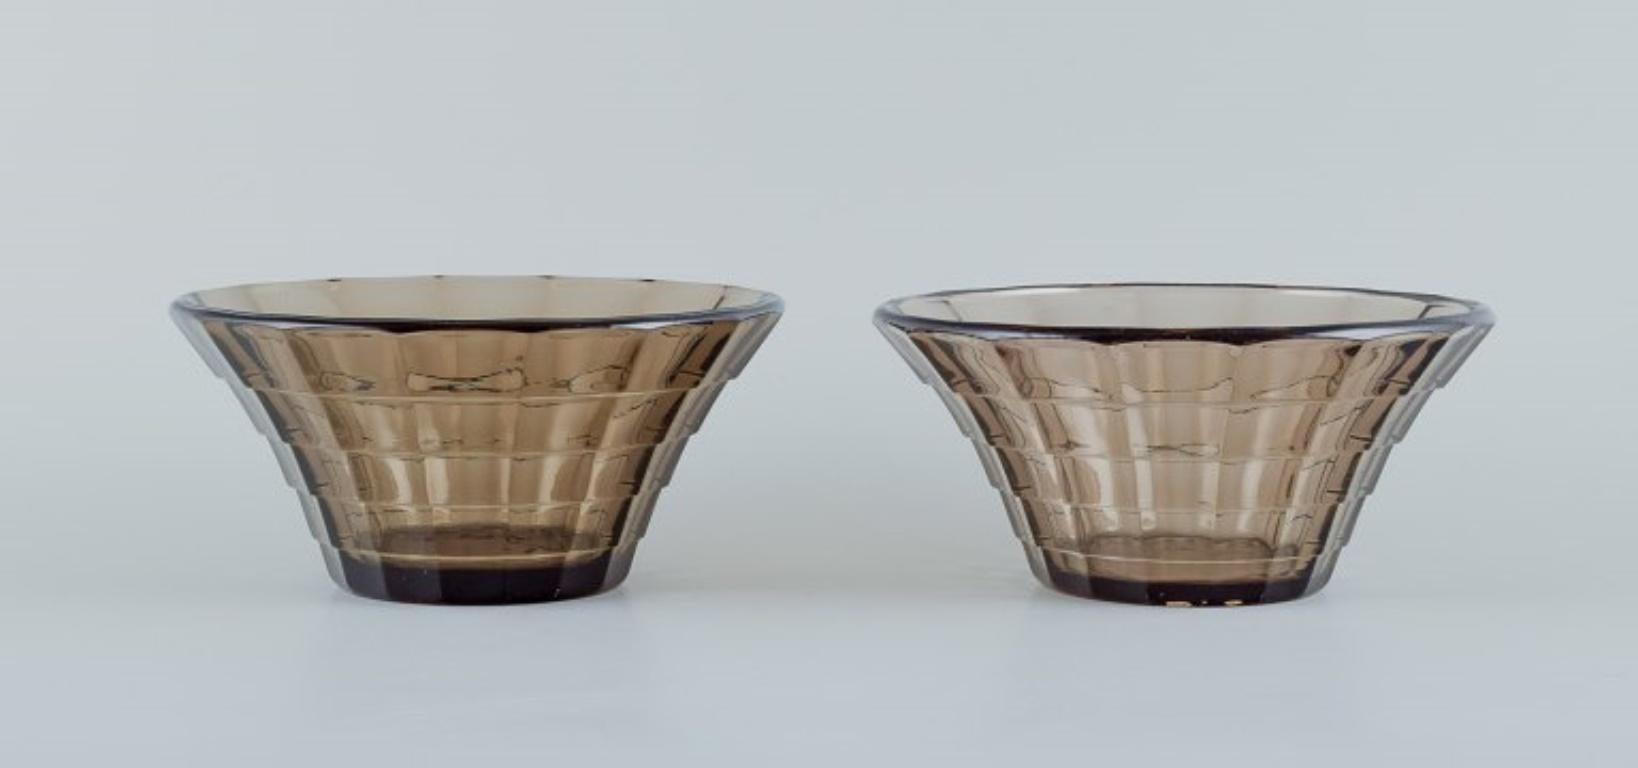 Simon Gate (1883-1945) for Orrefors/Sandvik, Sweden.
Two Art Deco bowls in smoked-coloured pressed glass.
Model G756.
Ca. 1940.
In perfect condition.
Dimensions: D 16.3 cm x H 8.2 cm.